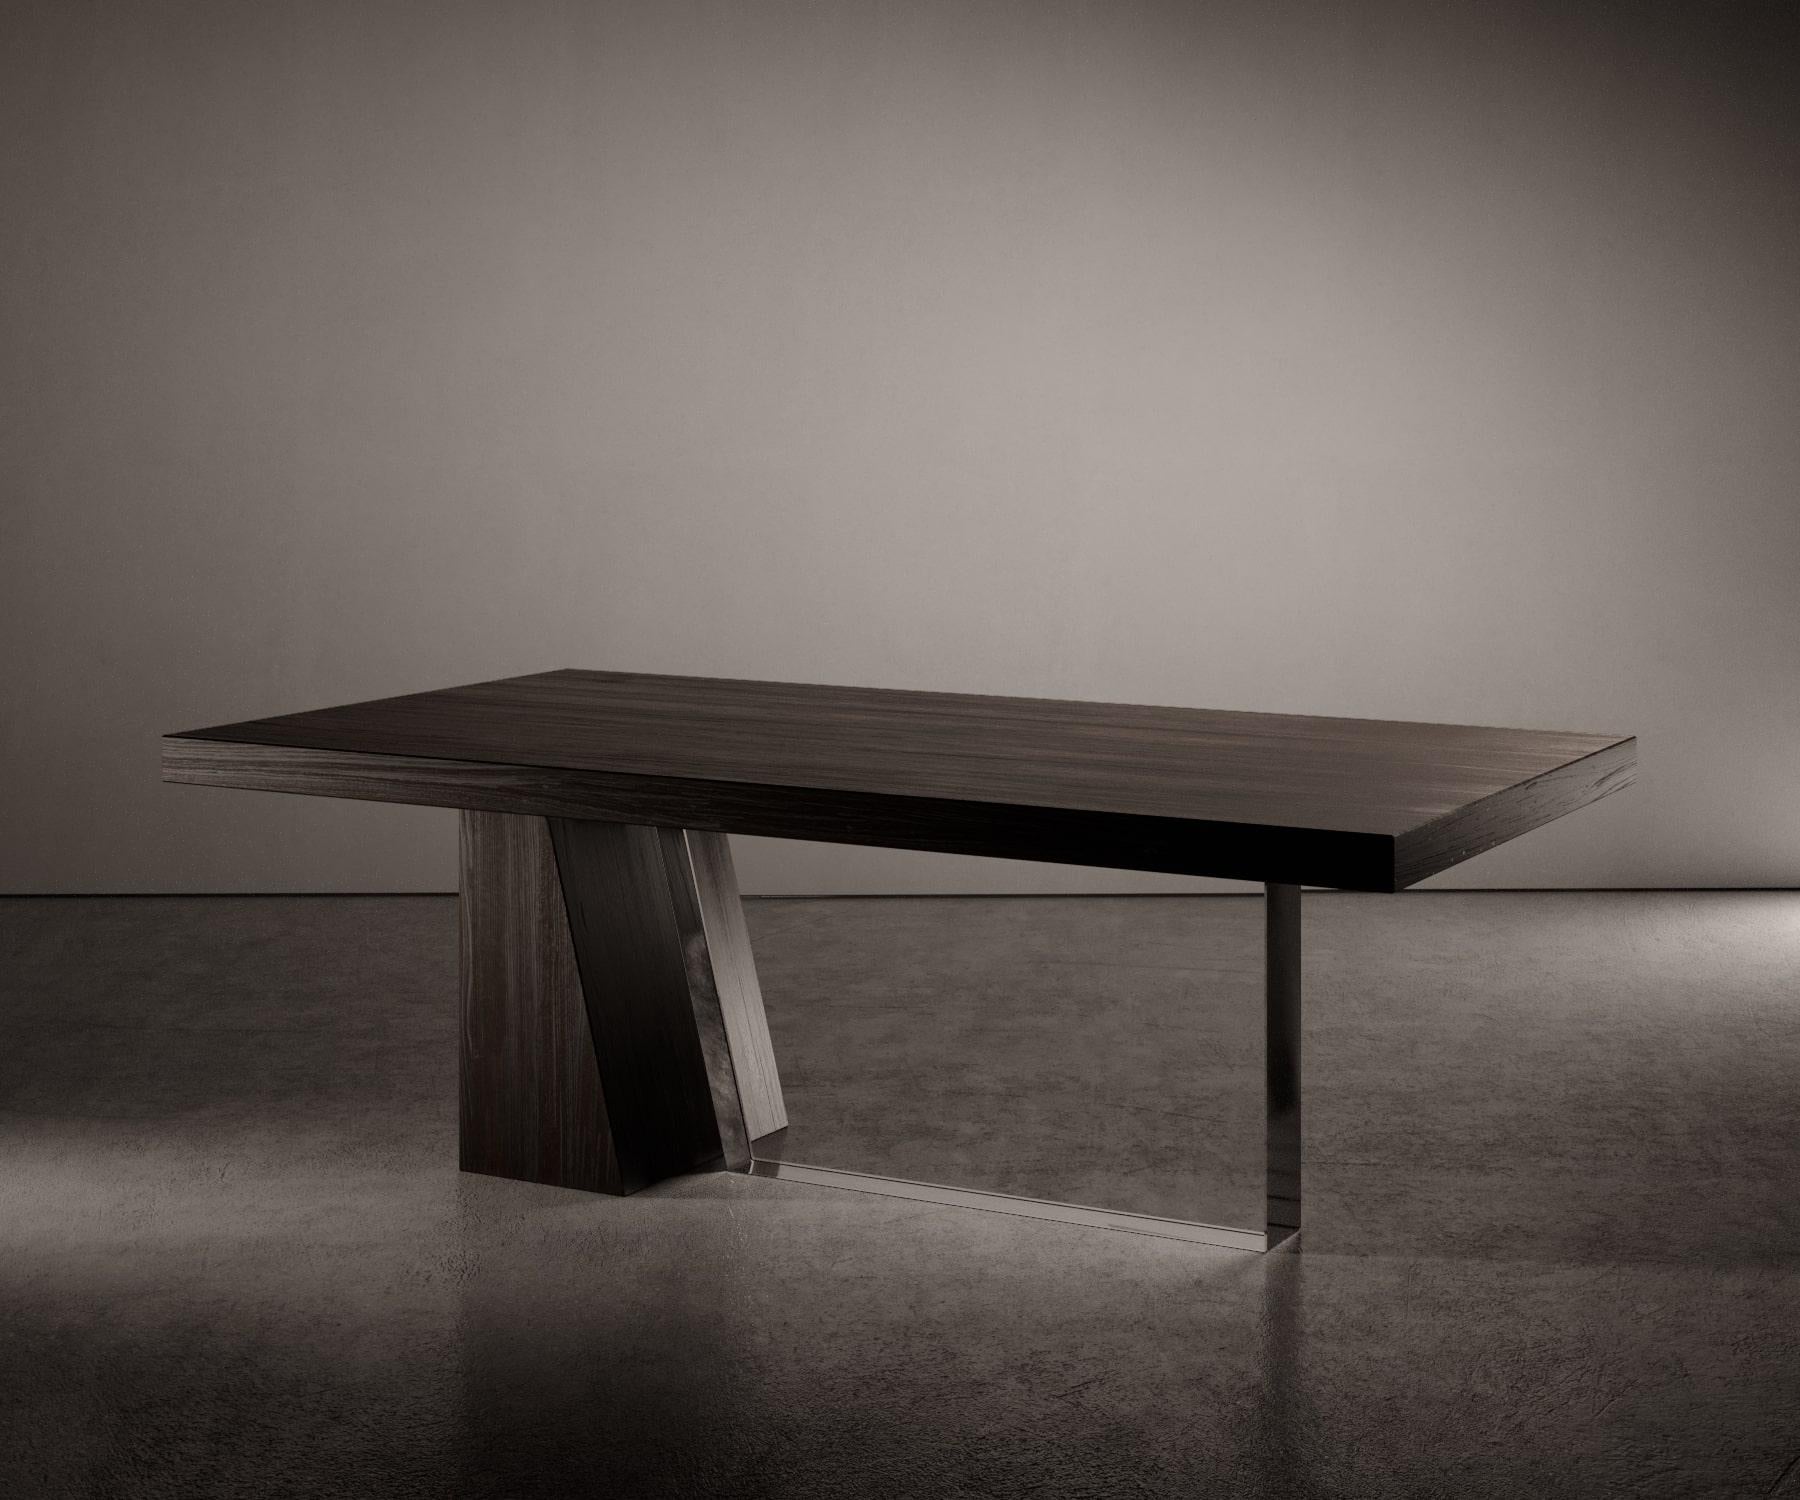 Balance table sculpted by Alexandr Pinchuk
Dimensions: 120 x 220 x H 76 cm
Materials: Wood, plywood, oil, glass.




   